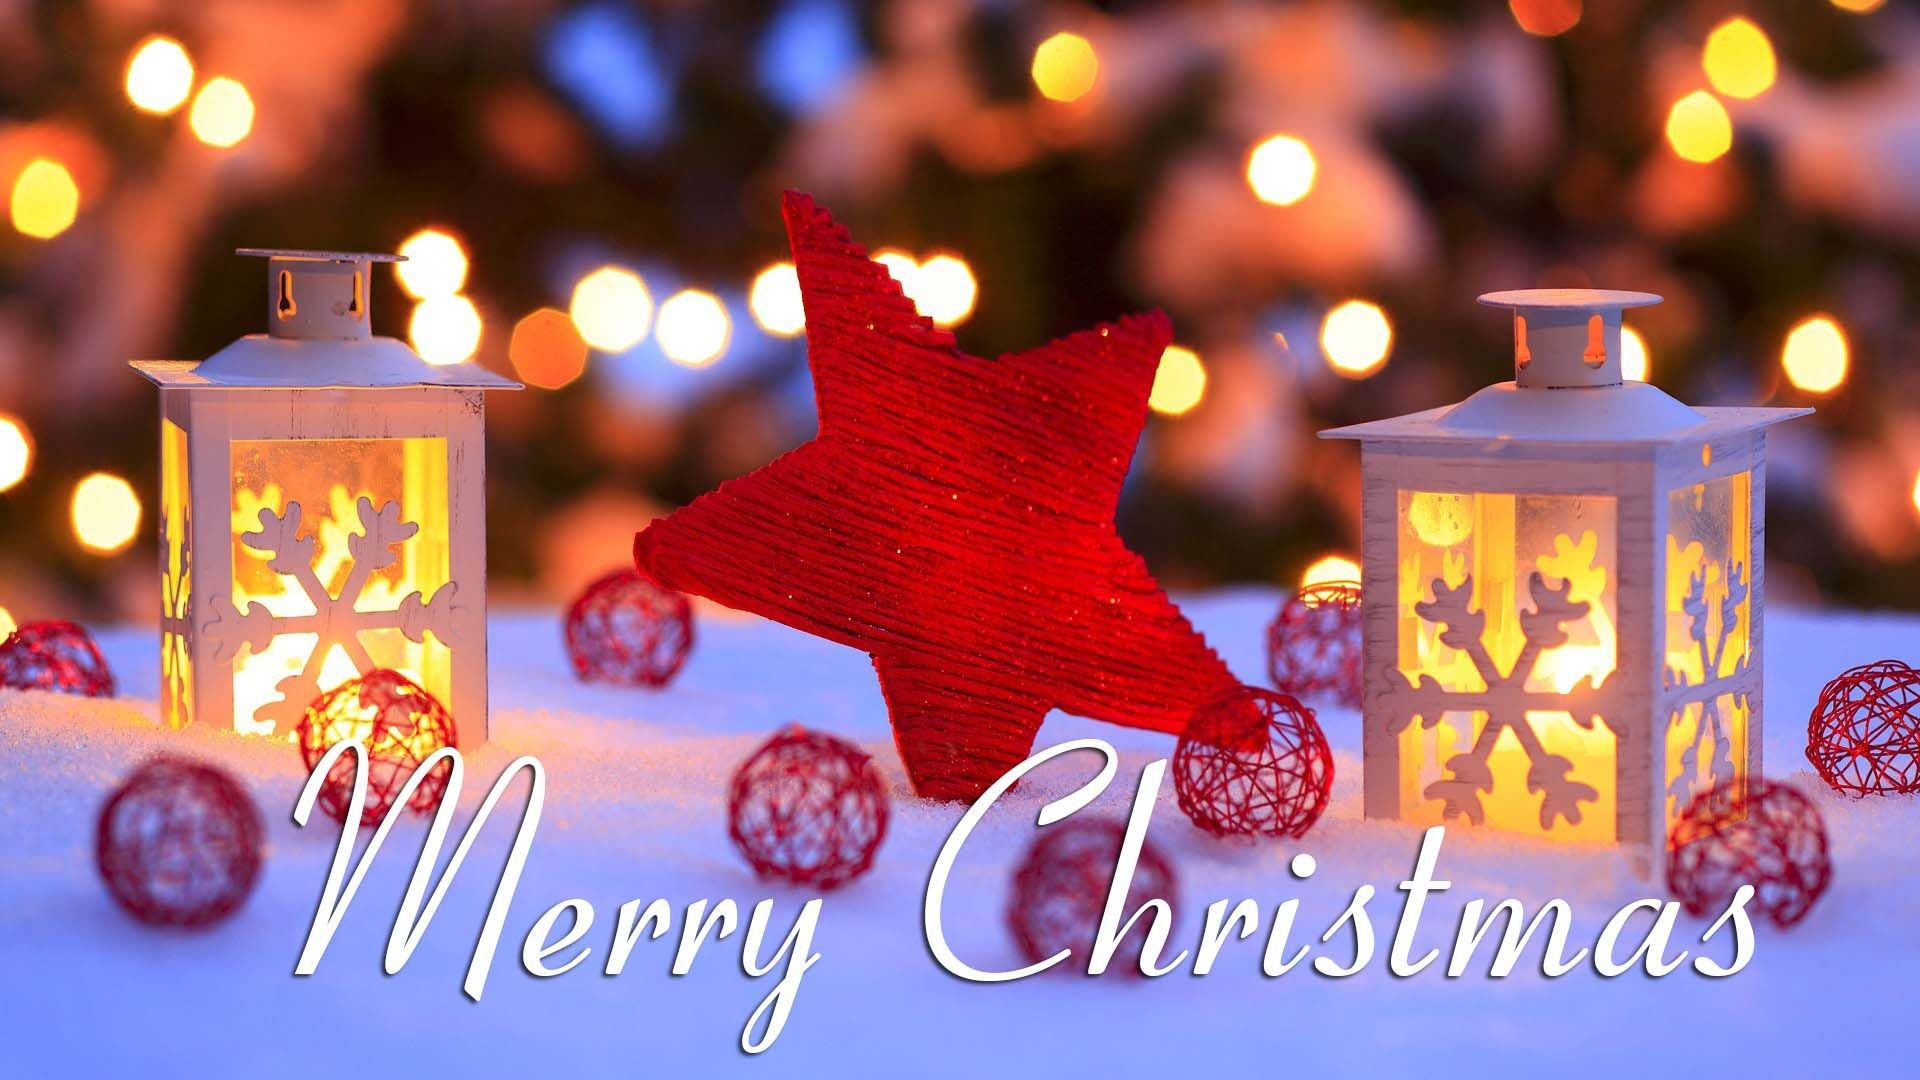 1920x1080 Merry Christmas 2017 : Christmas Quotes, Wishes, SMS, Greetings, Images and  Pictures